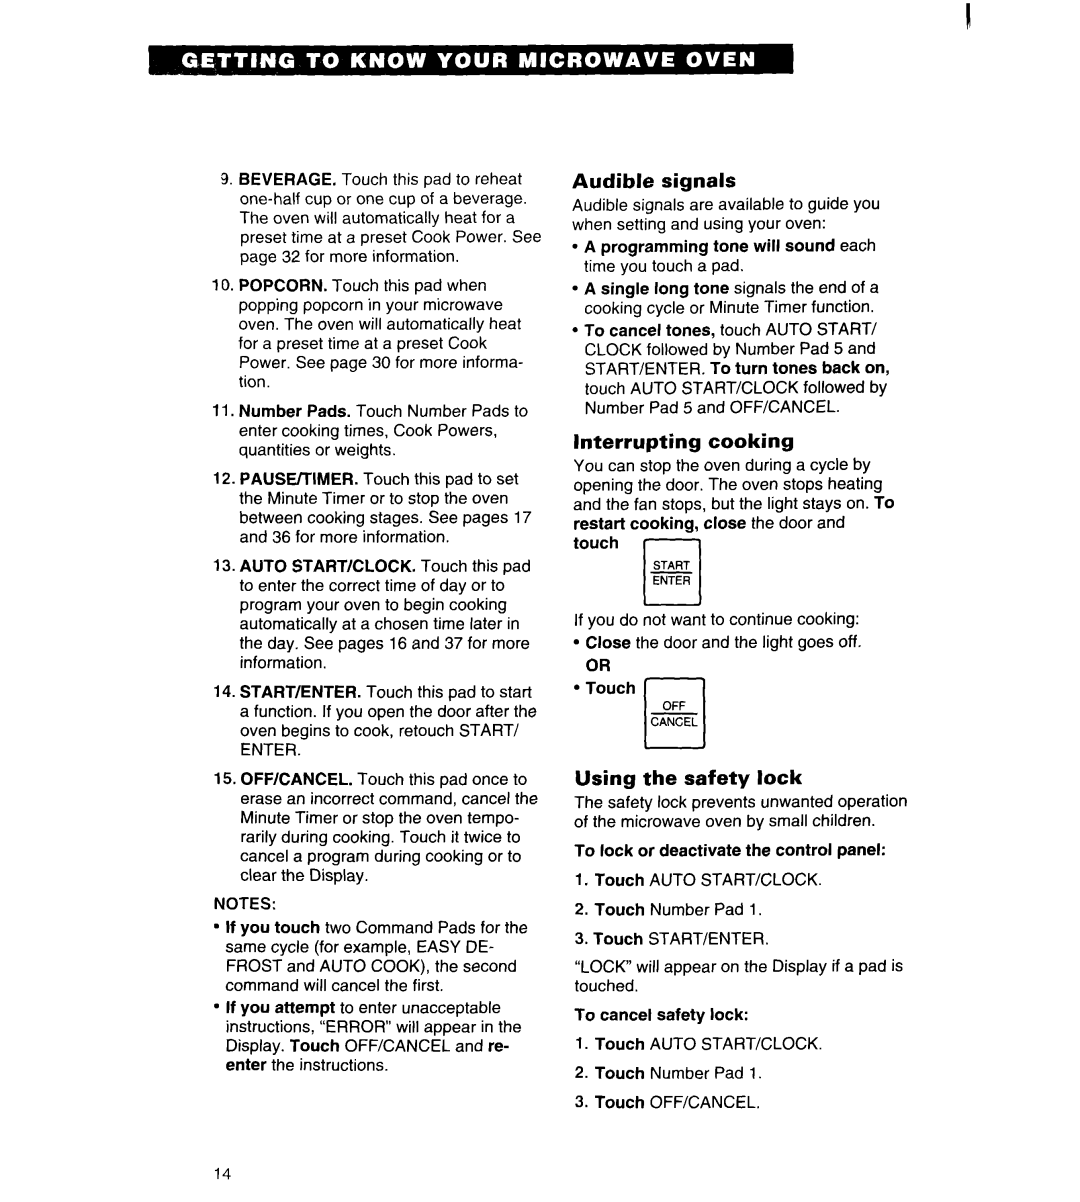 Whirlpool MT6120XBQ, MT6120XBB installation instructions Audible signals, Interrupting cooking, Using the safety lock 